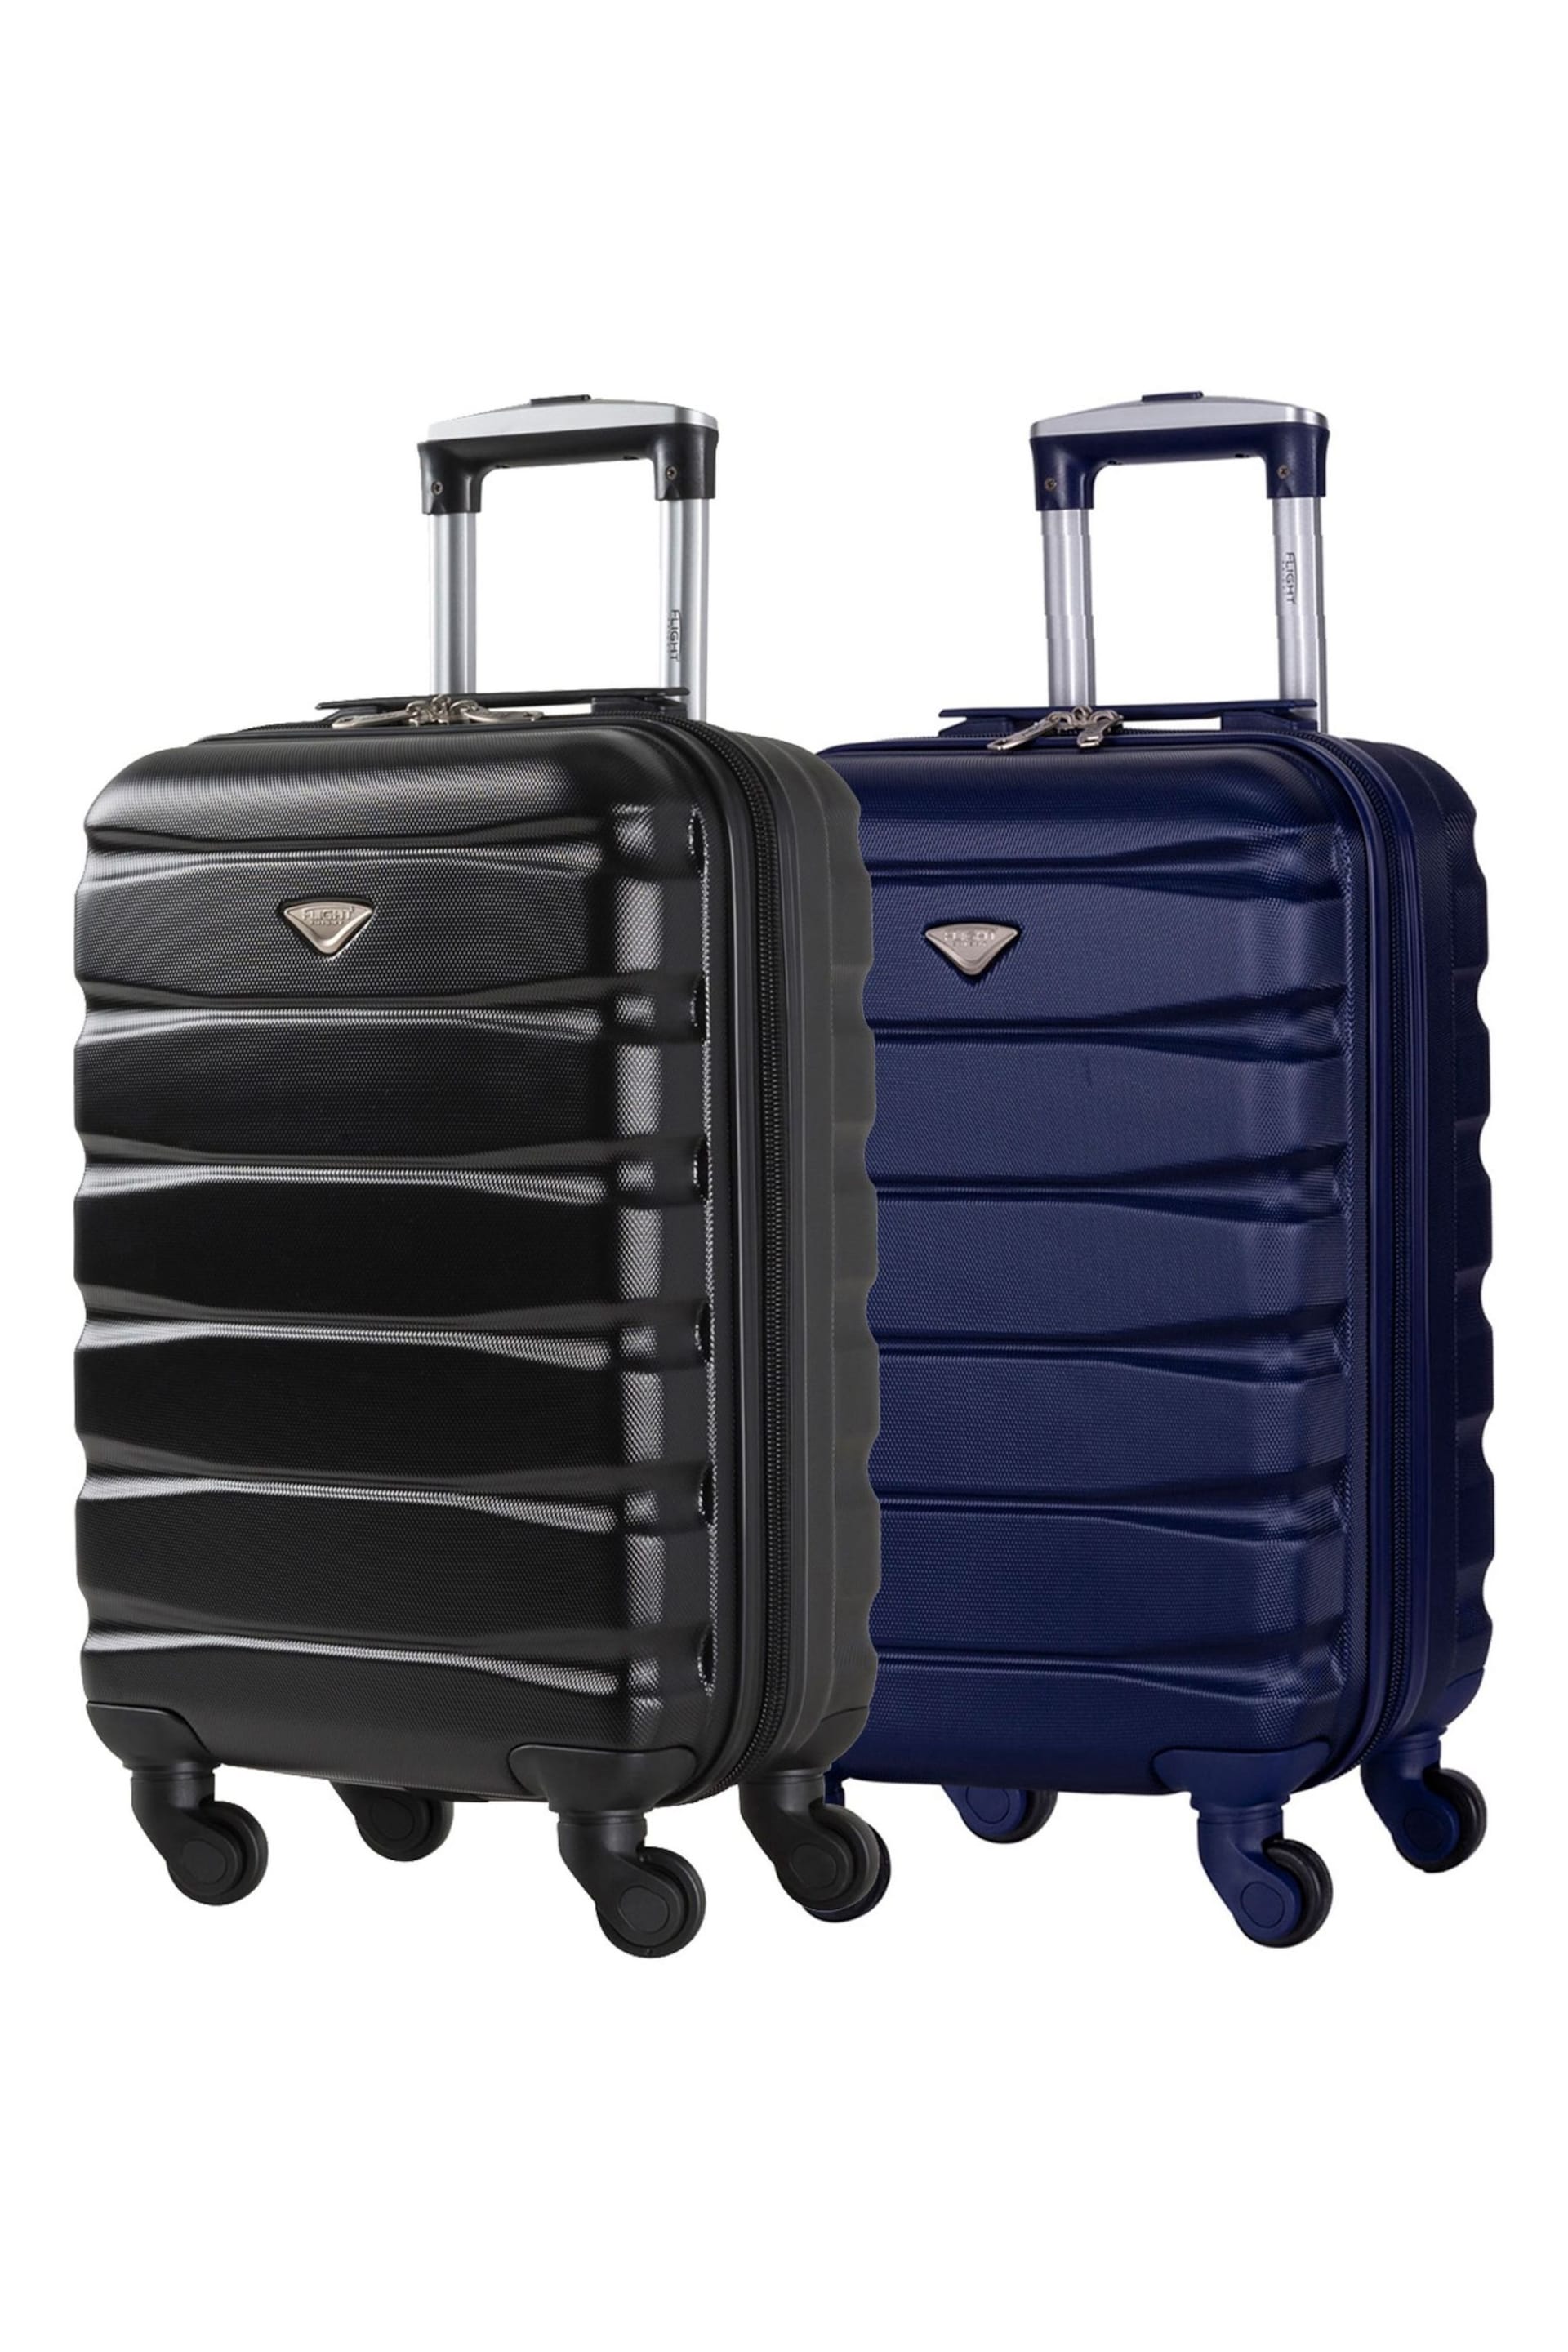 Flight Knight EasyJet Overhead 55x35x20cm Hard Shell Cabin Carry On Case Suitcase Set Of 2 - Image 1 of 7